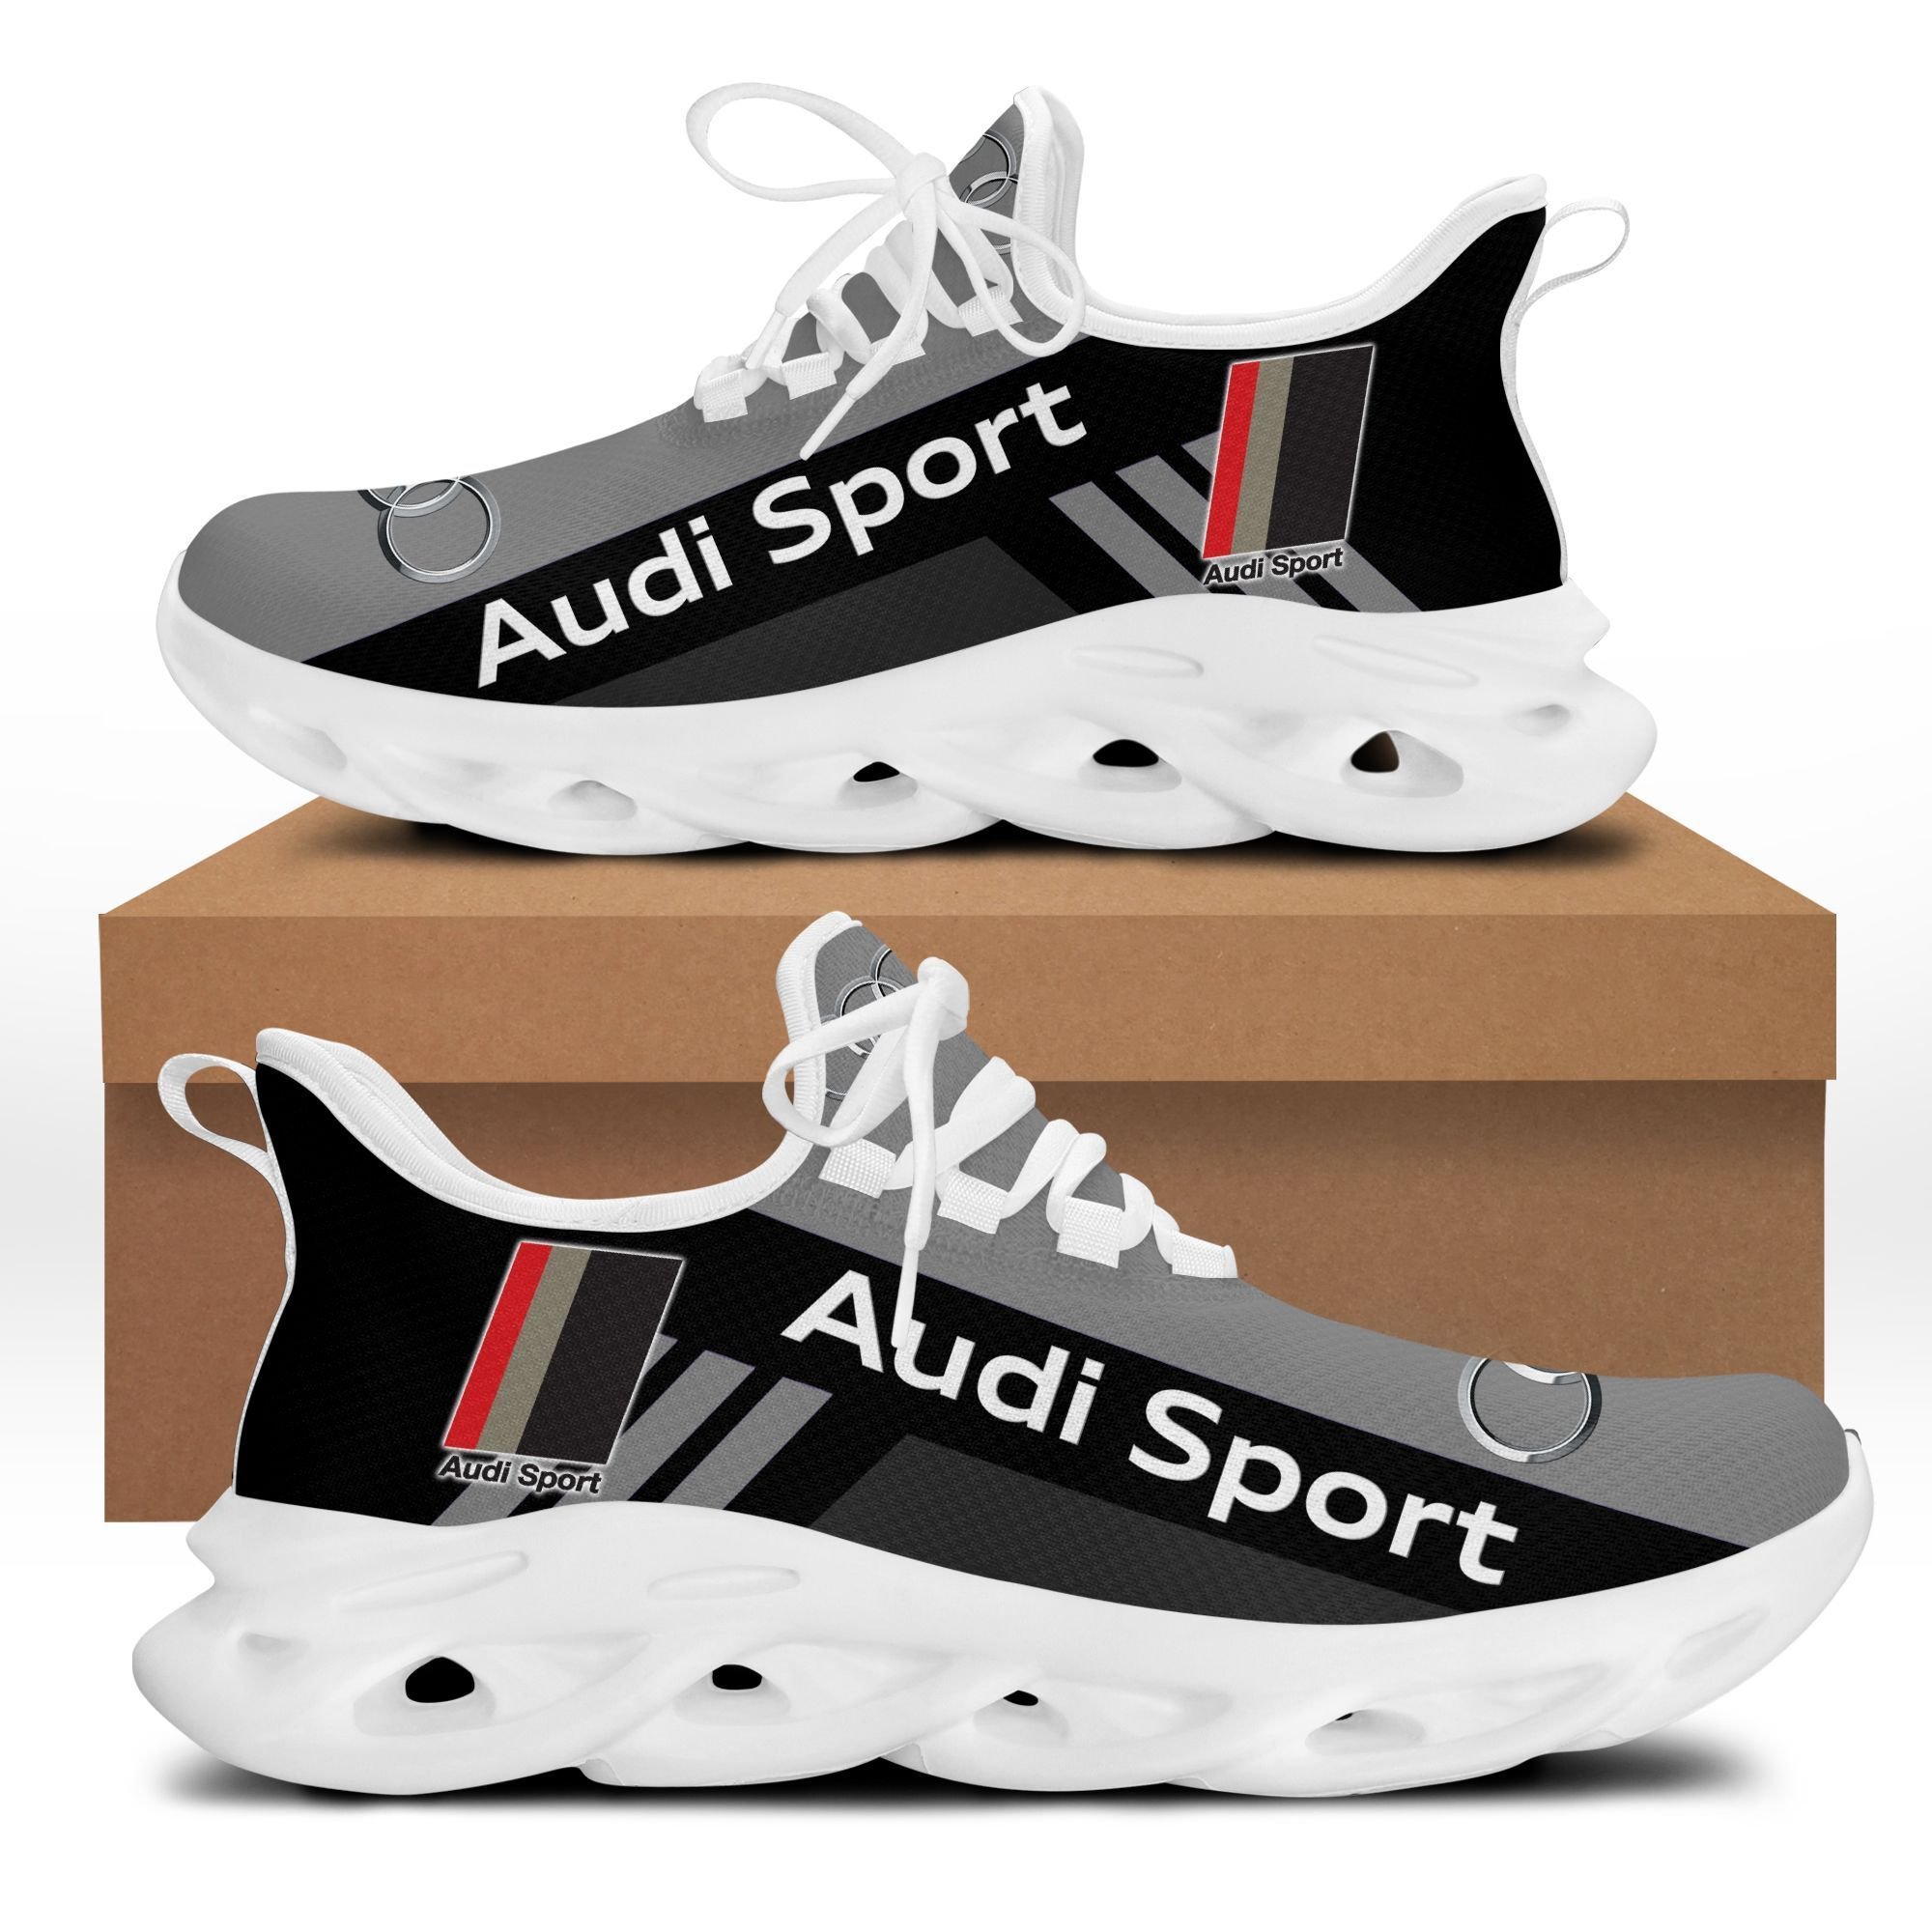 Audi Sport clunky max soul shoes – LIMITED EDITION